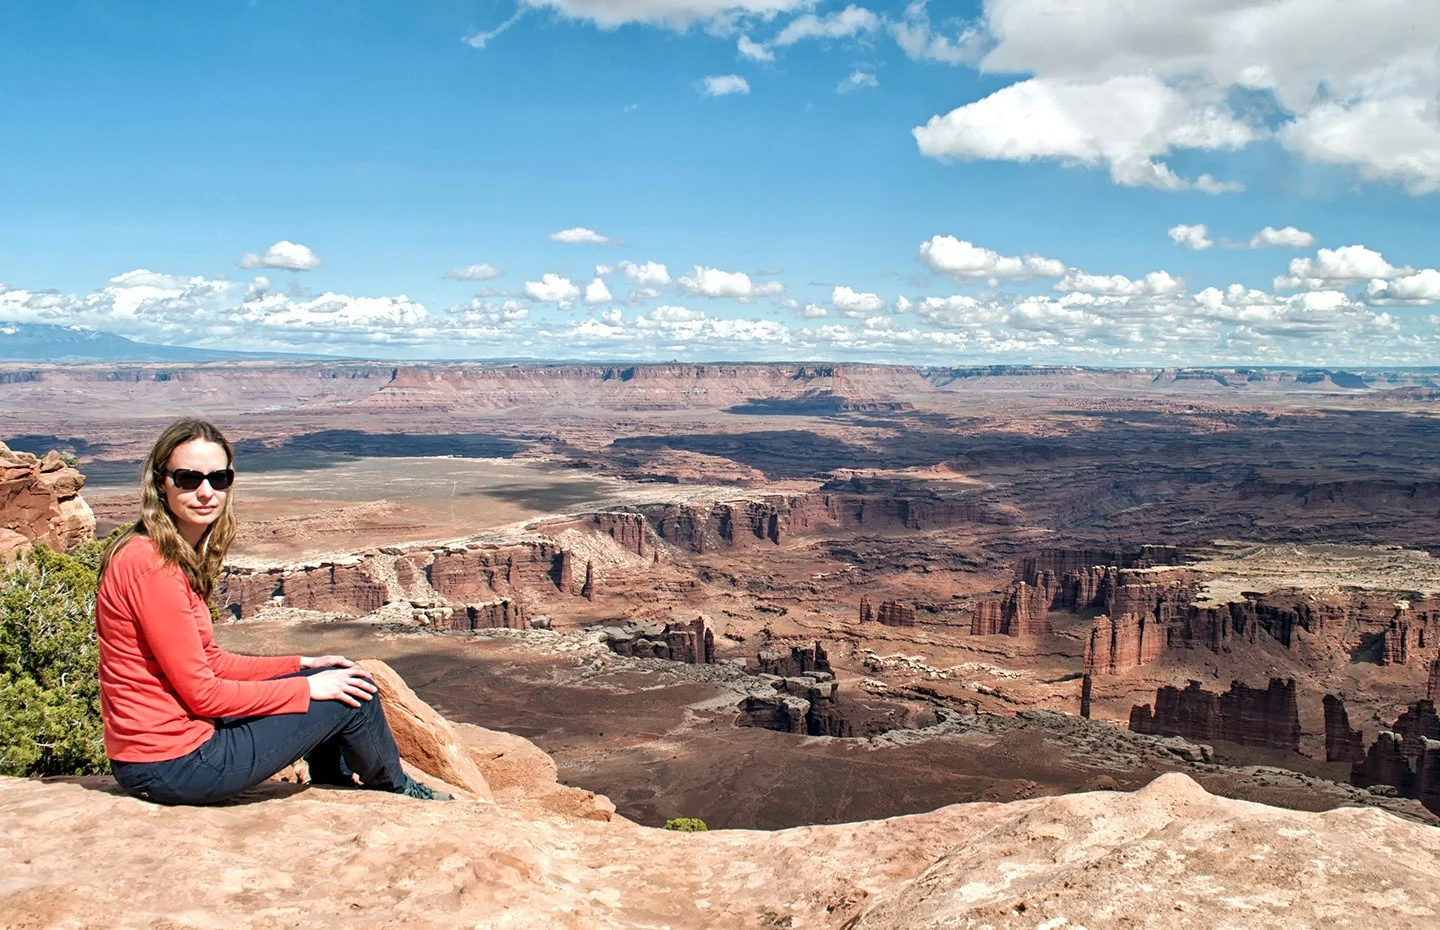 A southwest USA road trip to Canyonlands National Park